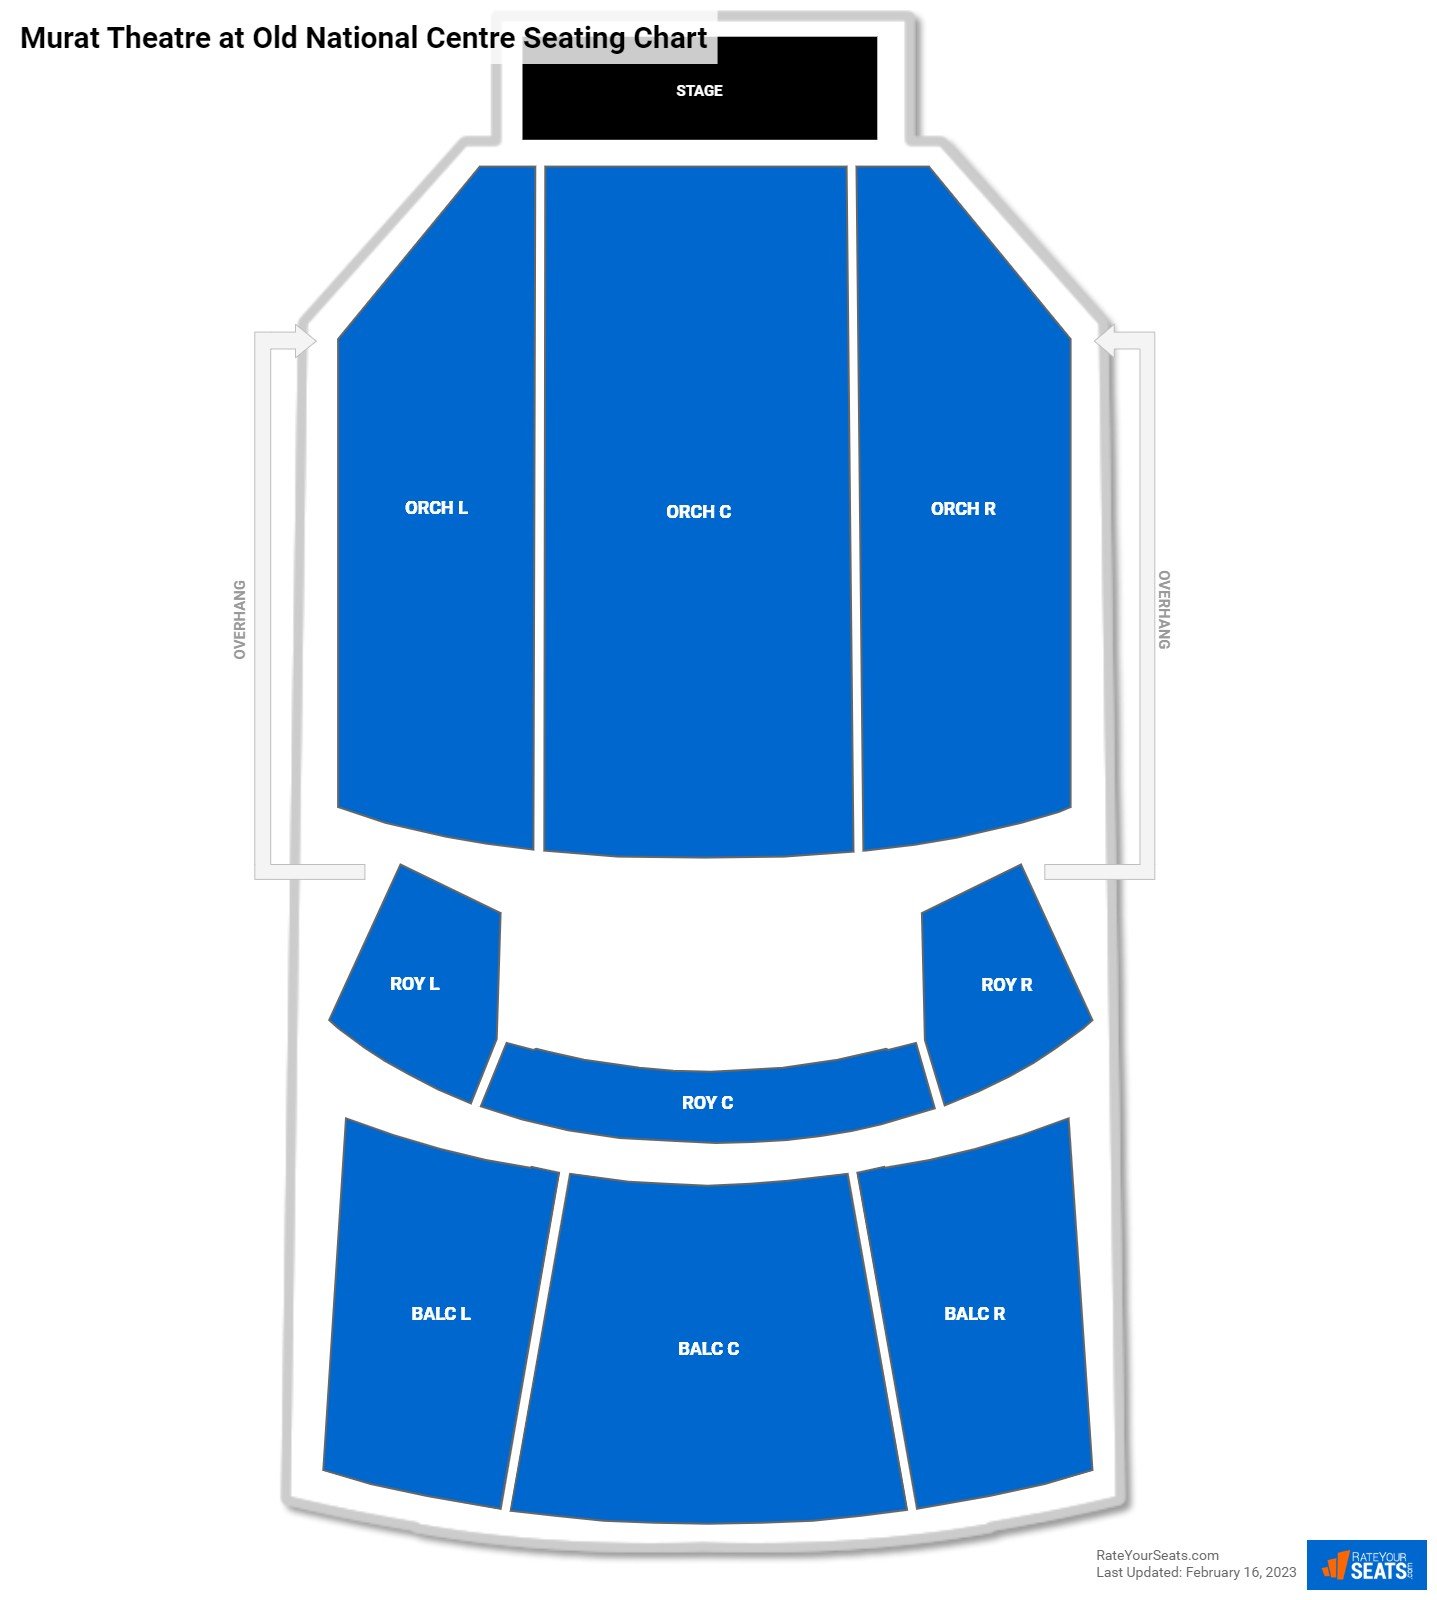 Murat Theatre at Old National Centre Theater Seating Chart